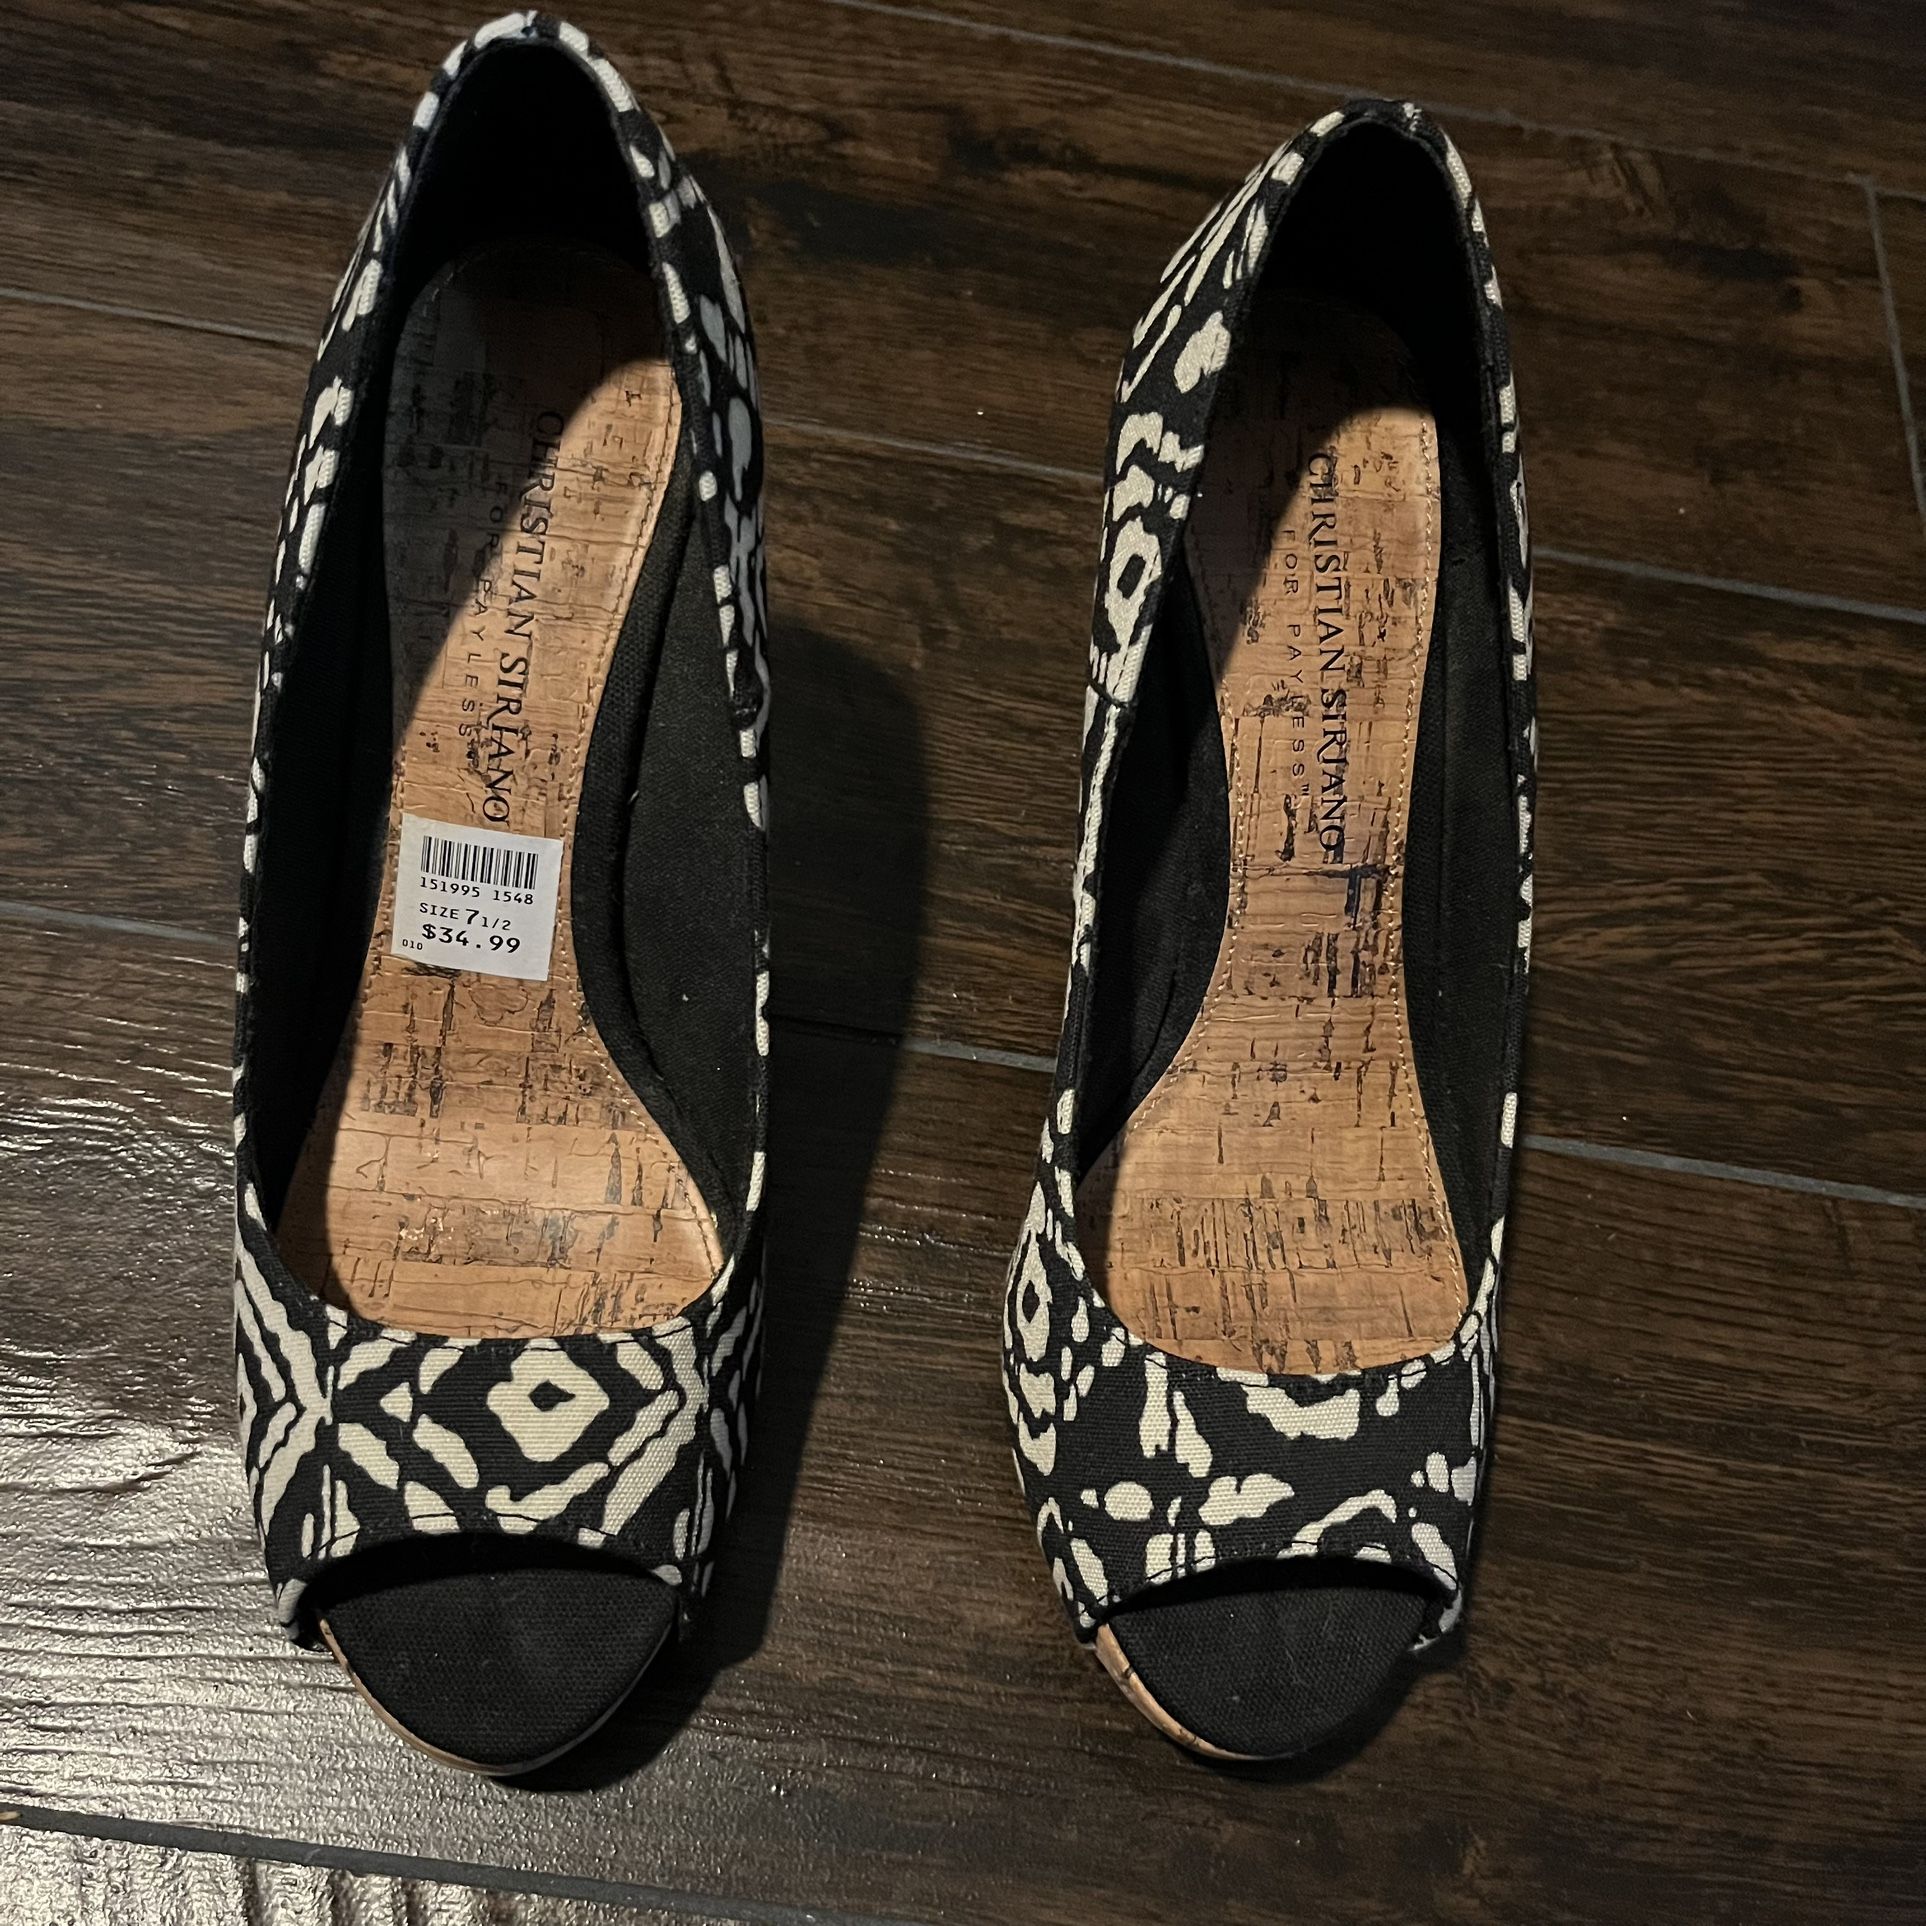 Women’s Size 7.5 Black And White Heels With Cork Heel